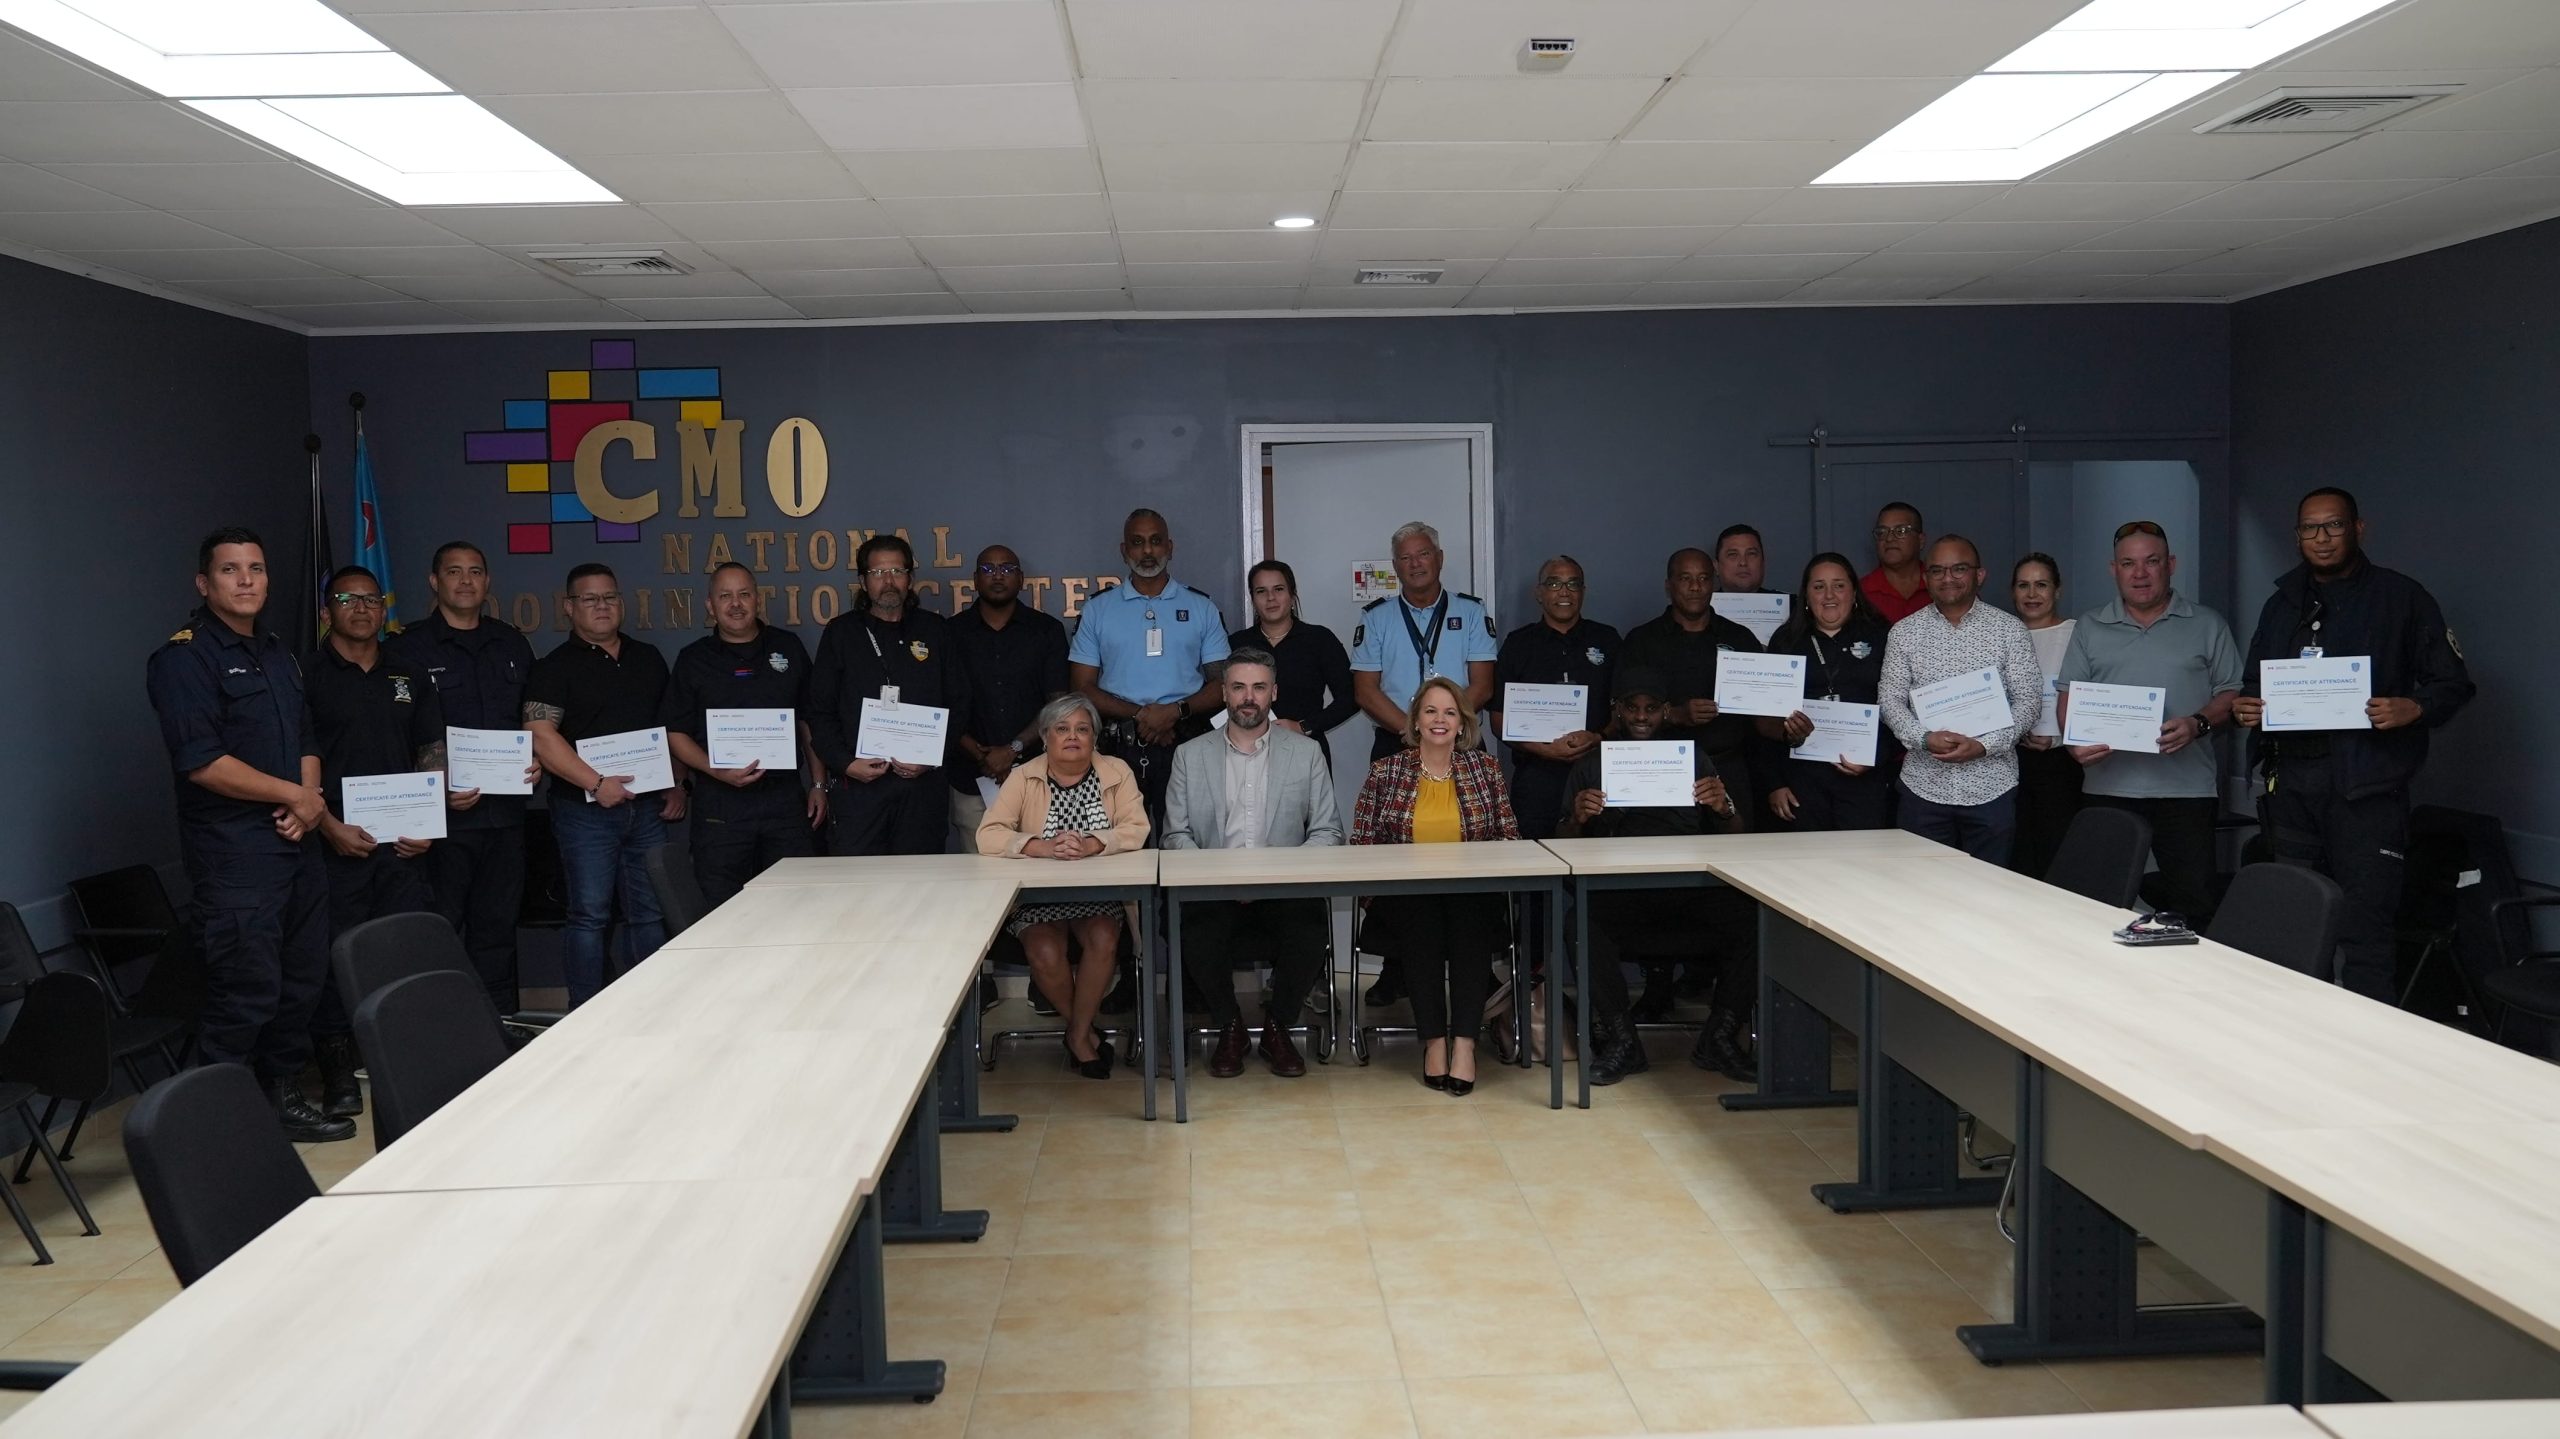 Cmo Certificaat20 Scaled